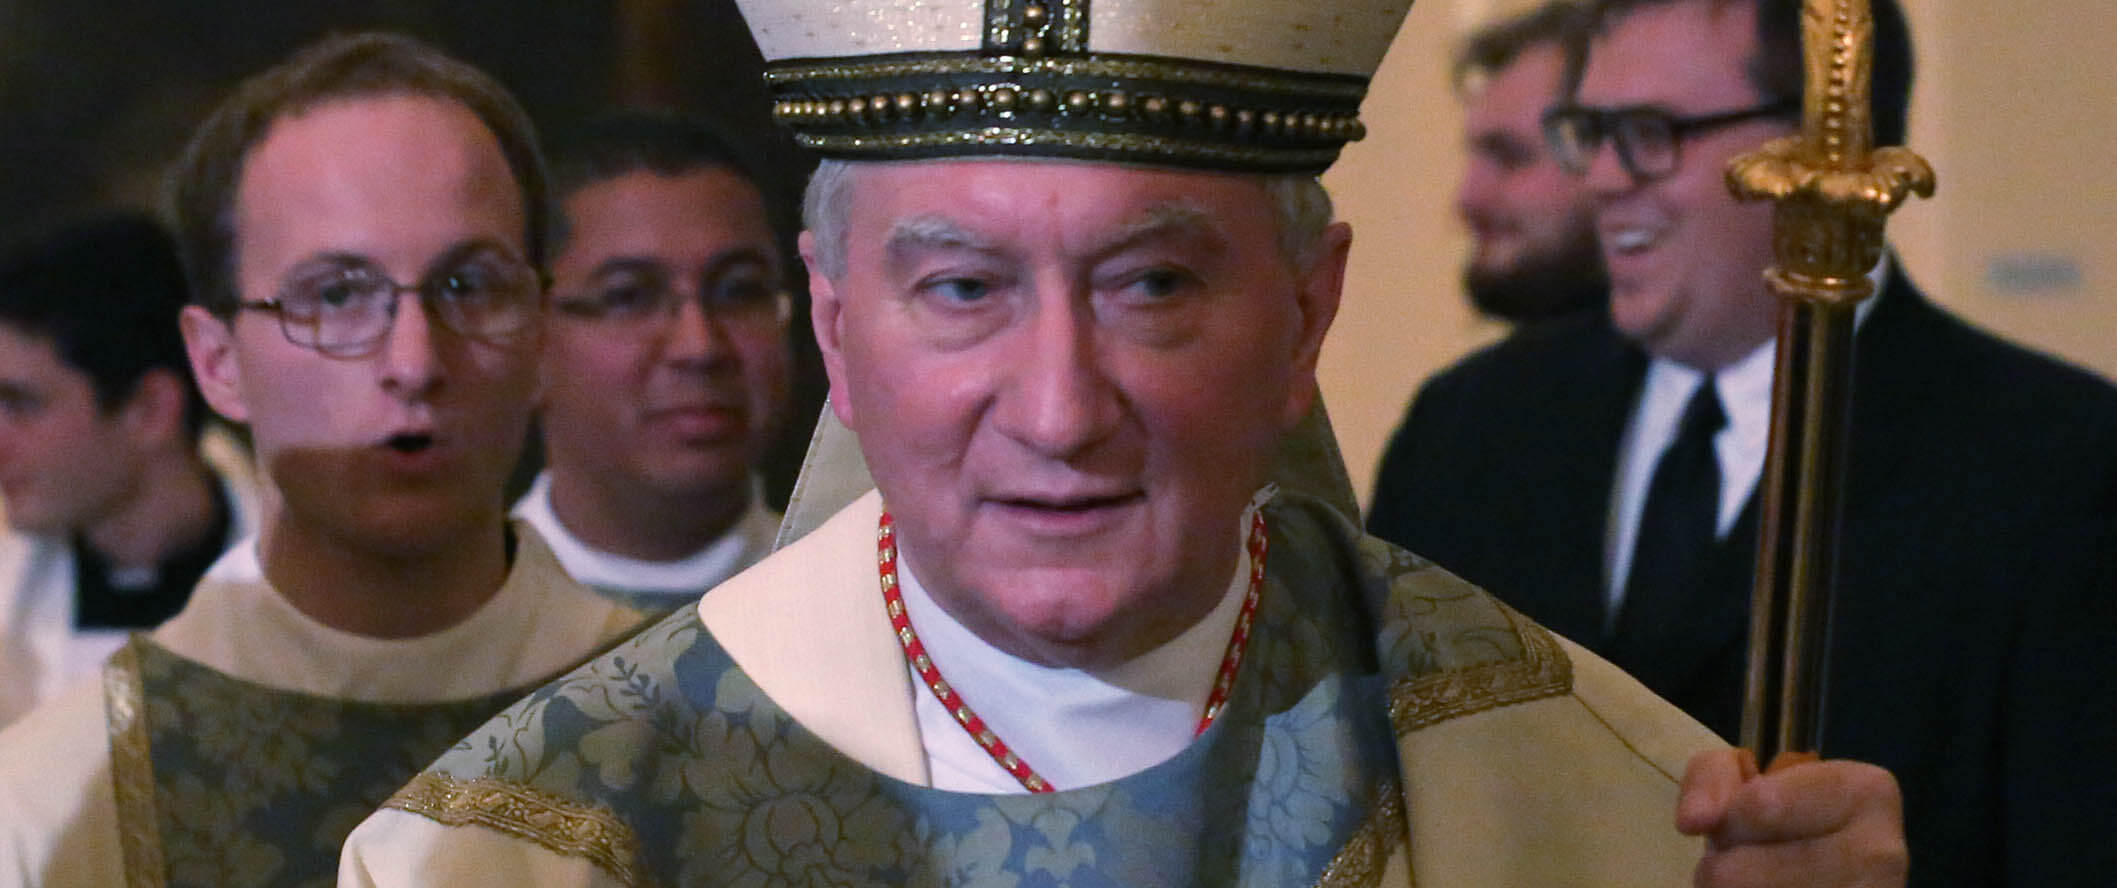 At Baltimore Mass, Cardinal Parolin praises USCCB for century of working for ‘a more just society’